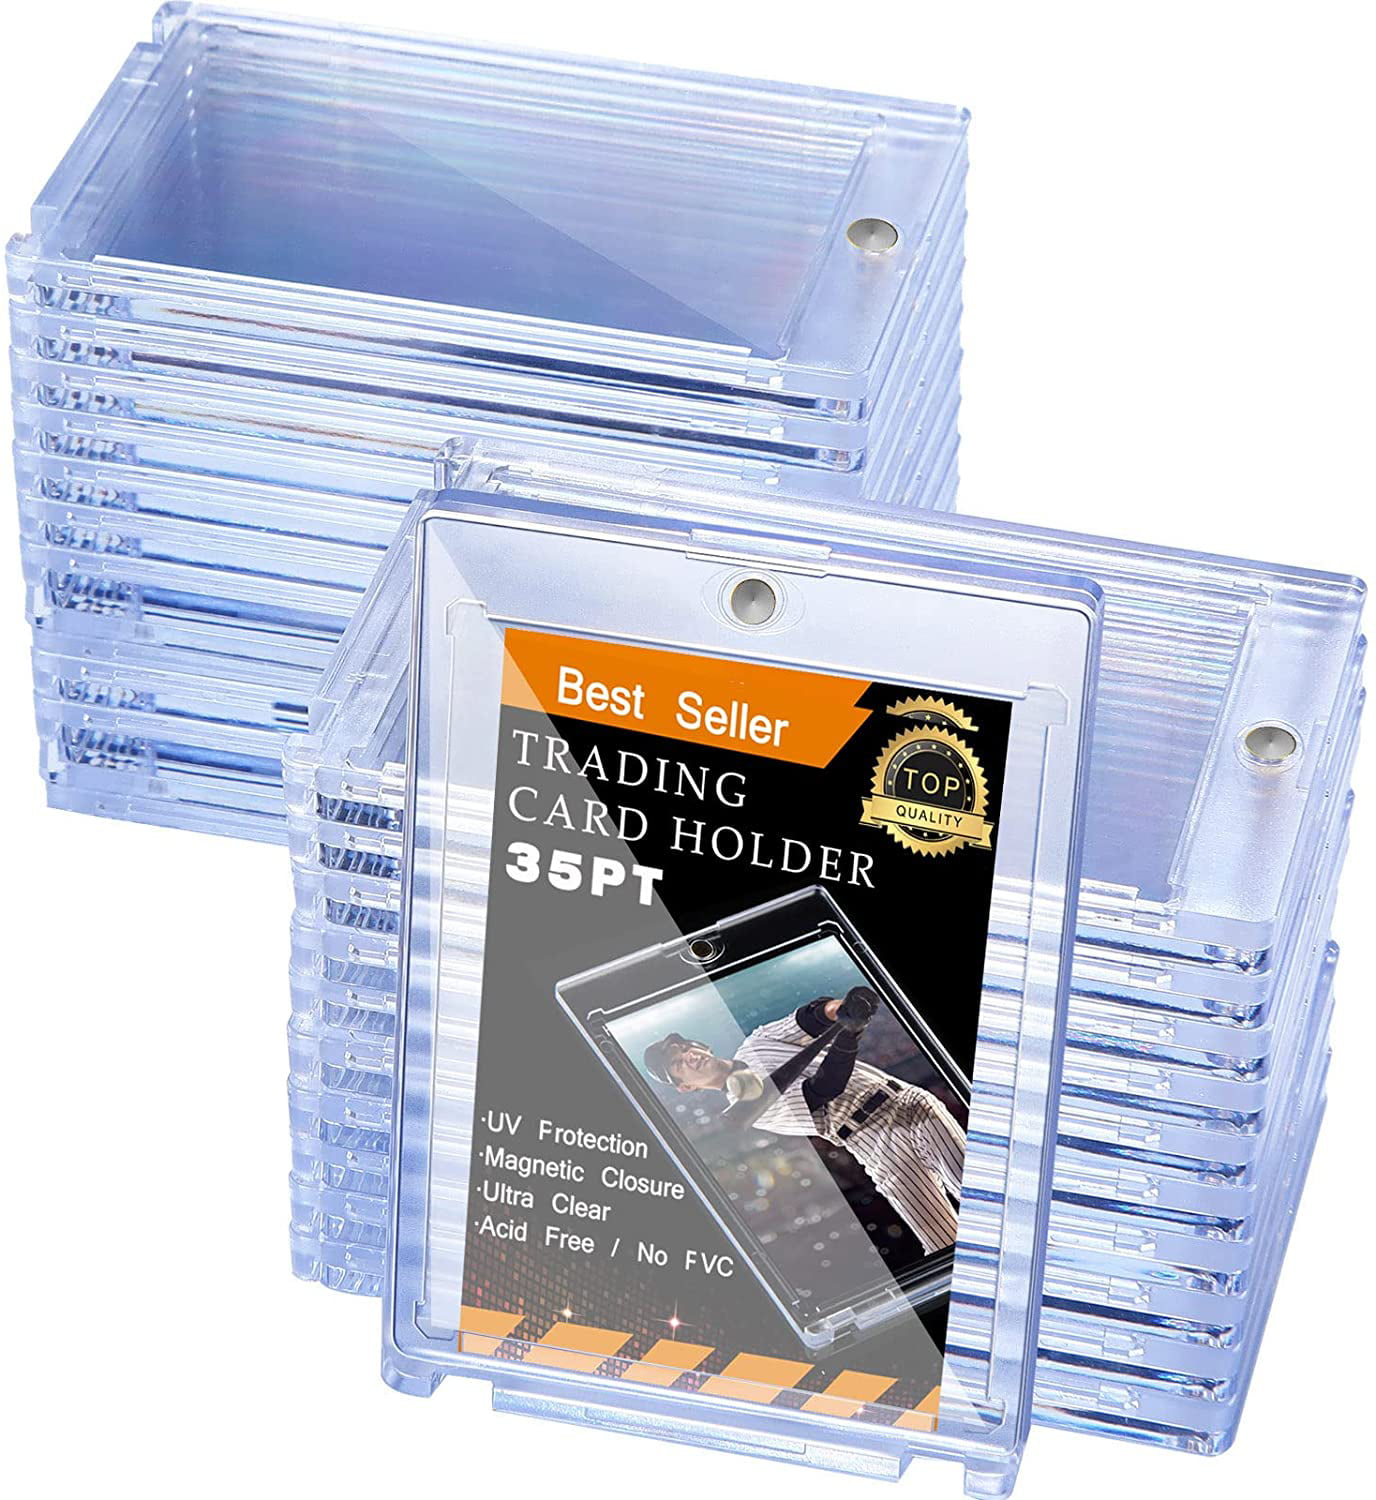 Acrylic Magnetic Card Holder 5 Pieces Acrylic Card Holder 35 PT Clear Card Protectors for Baseball Football Sports Card Trading Cards Game Card Storage and Display 